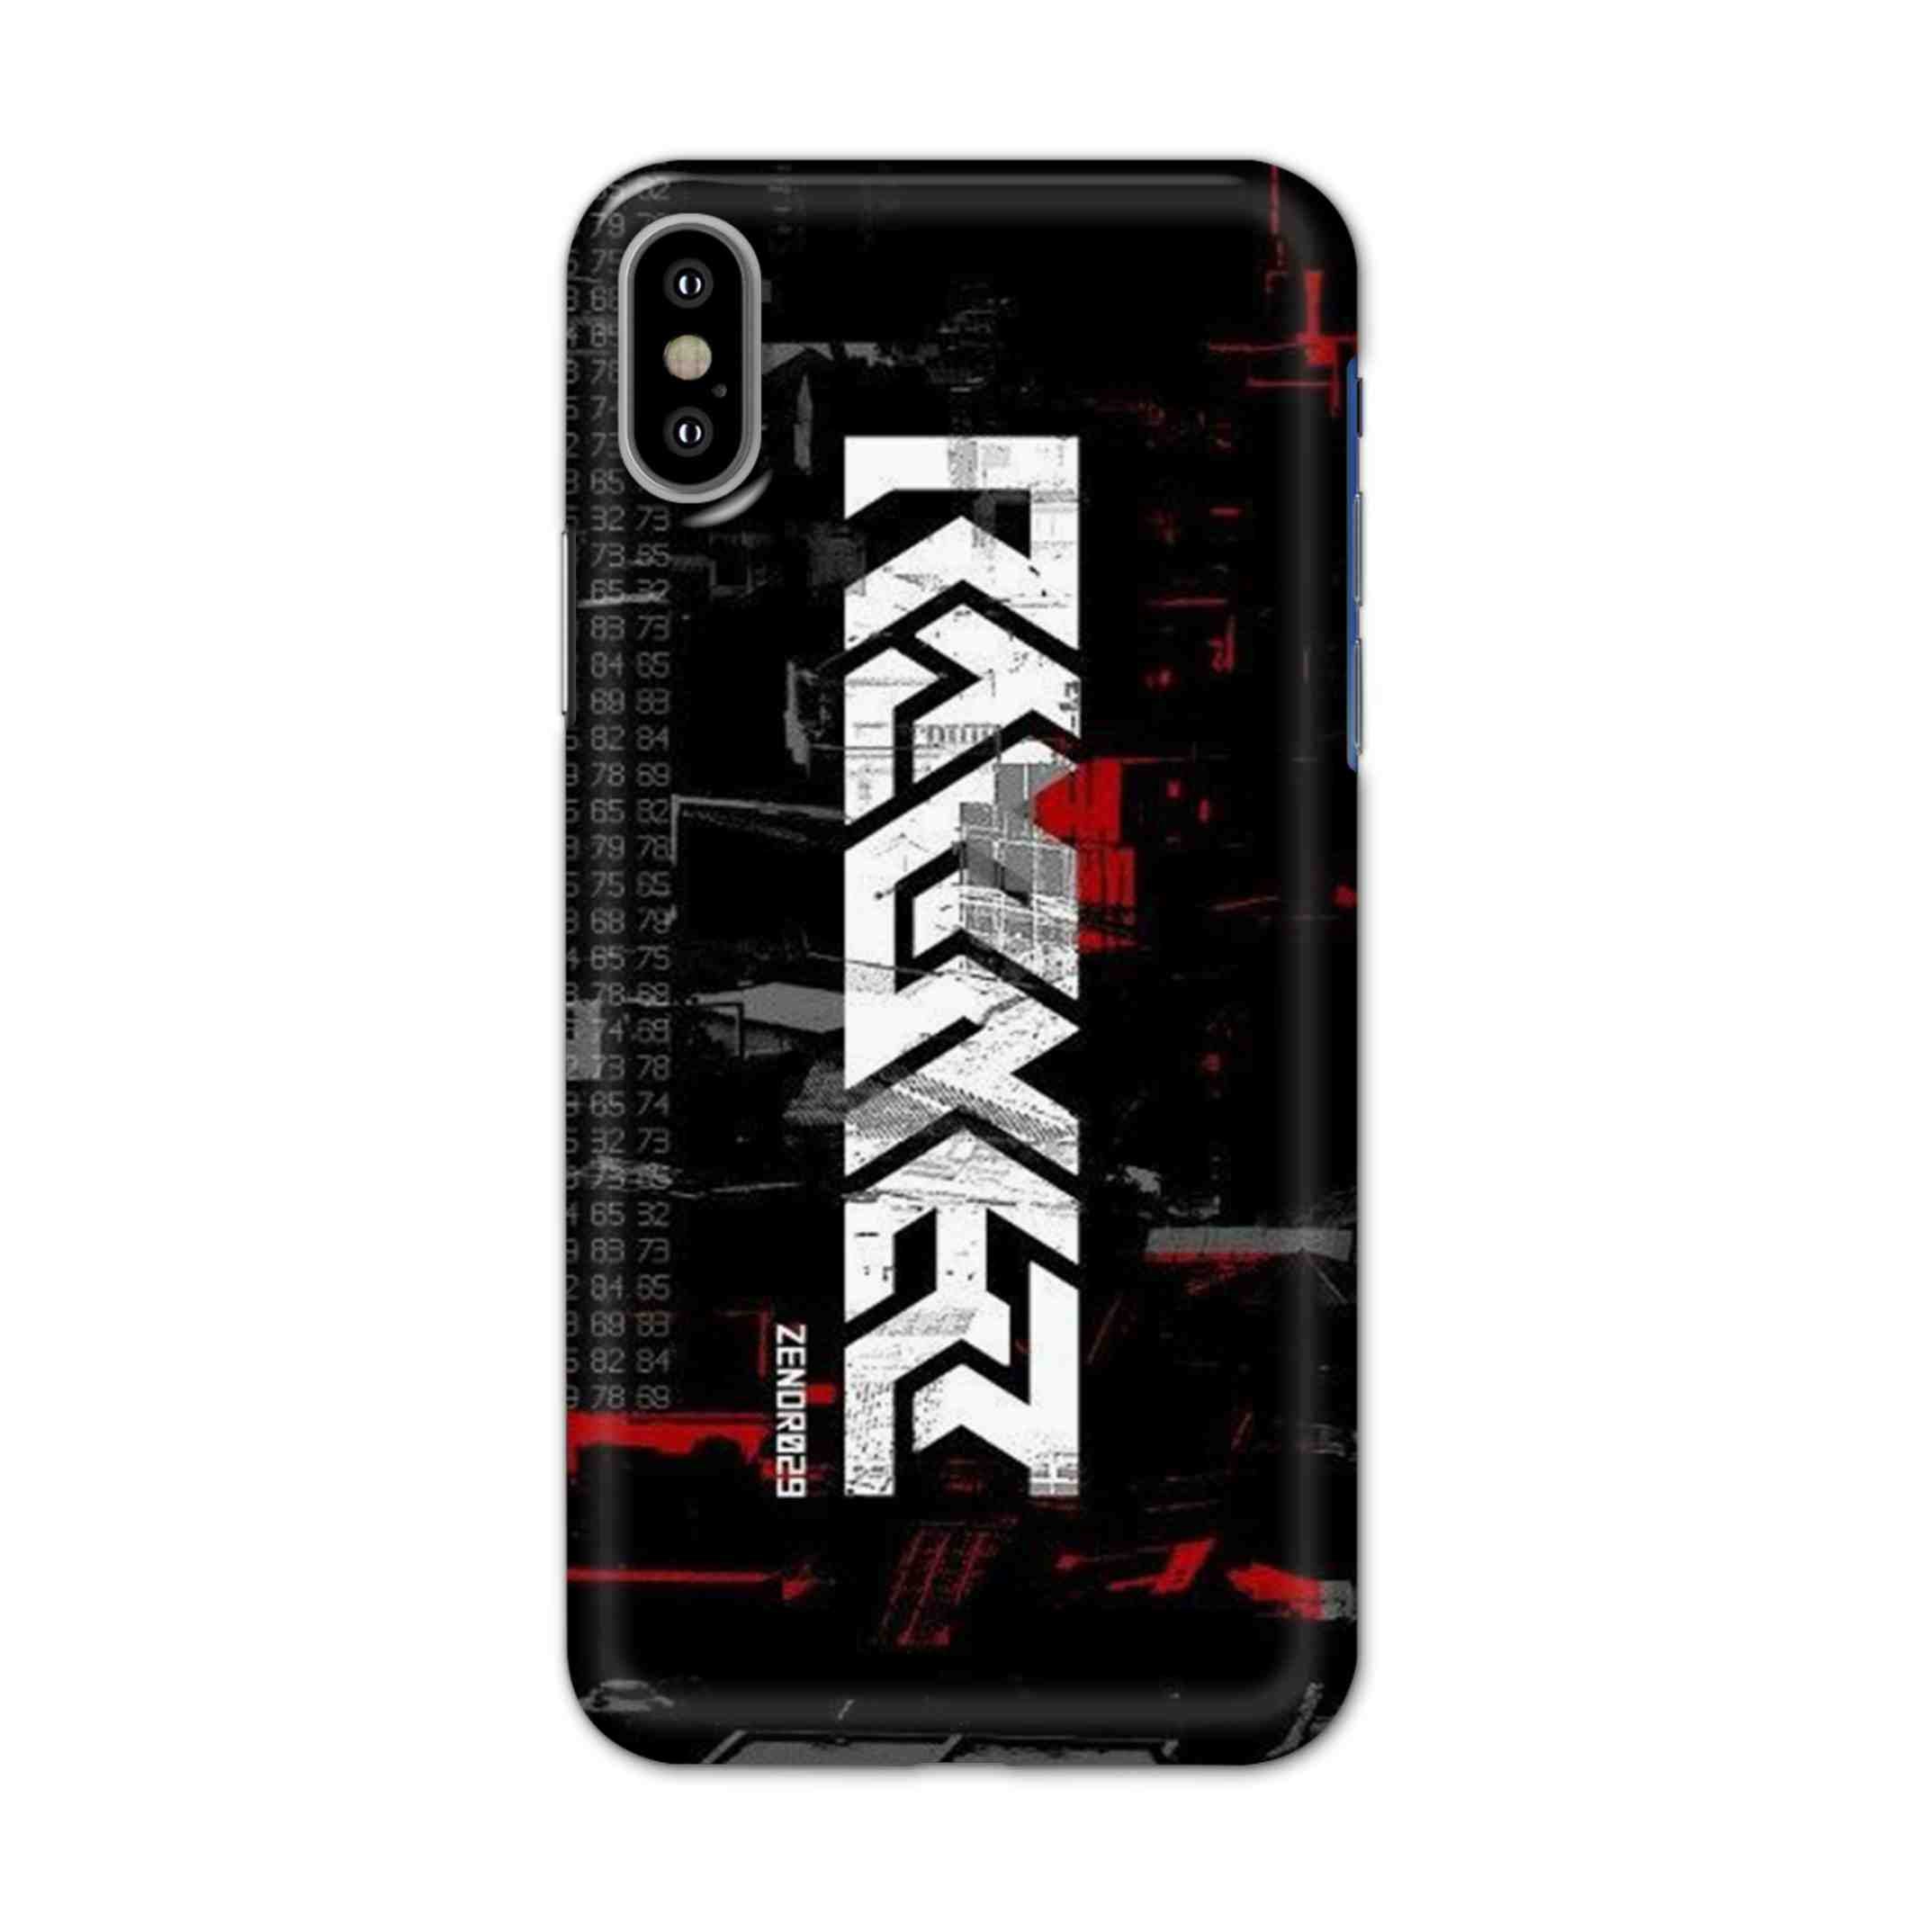 Buy Raxer Hard Back Mobile Phone Case/Cover For iPhone X Online